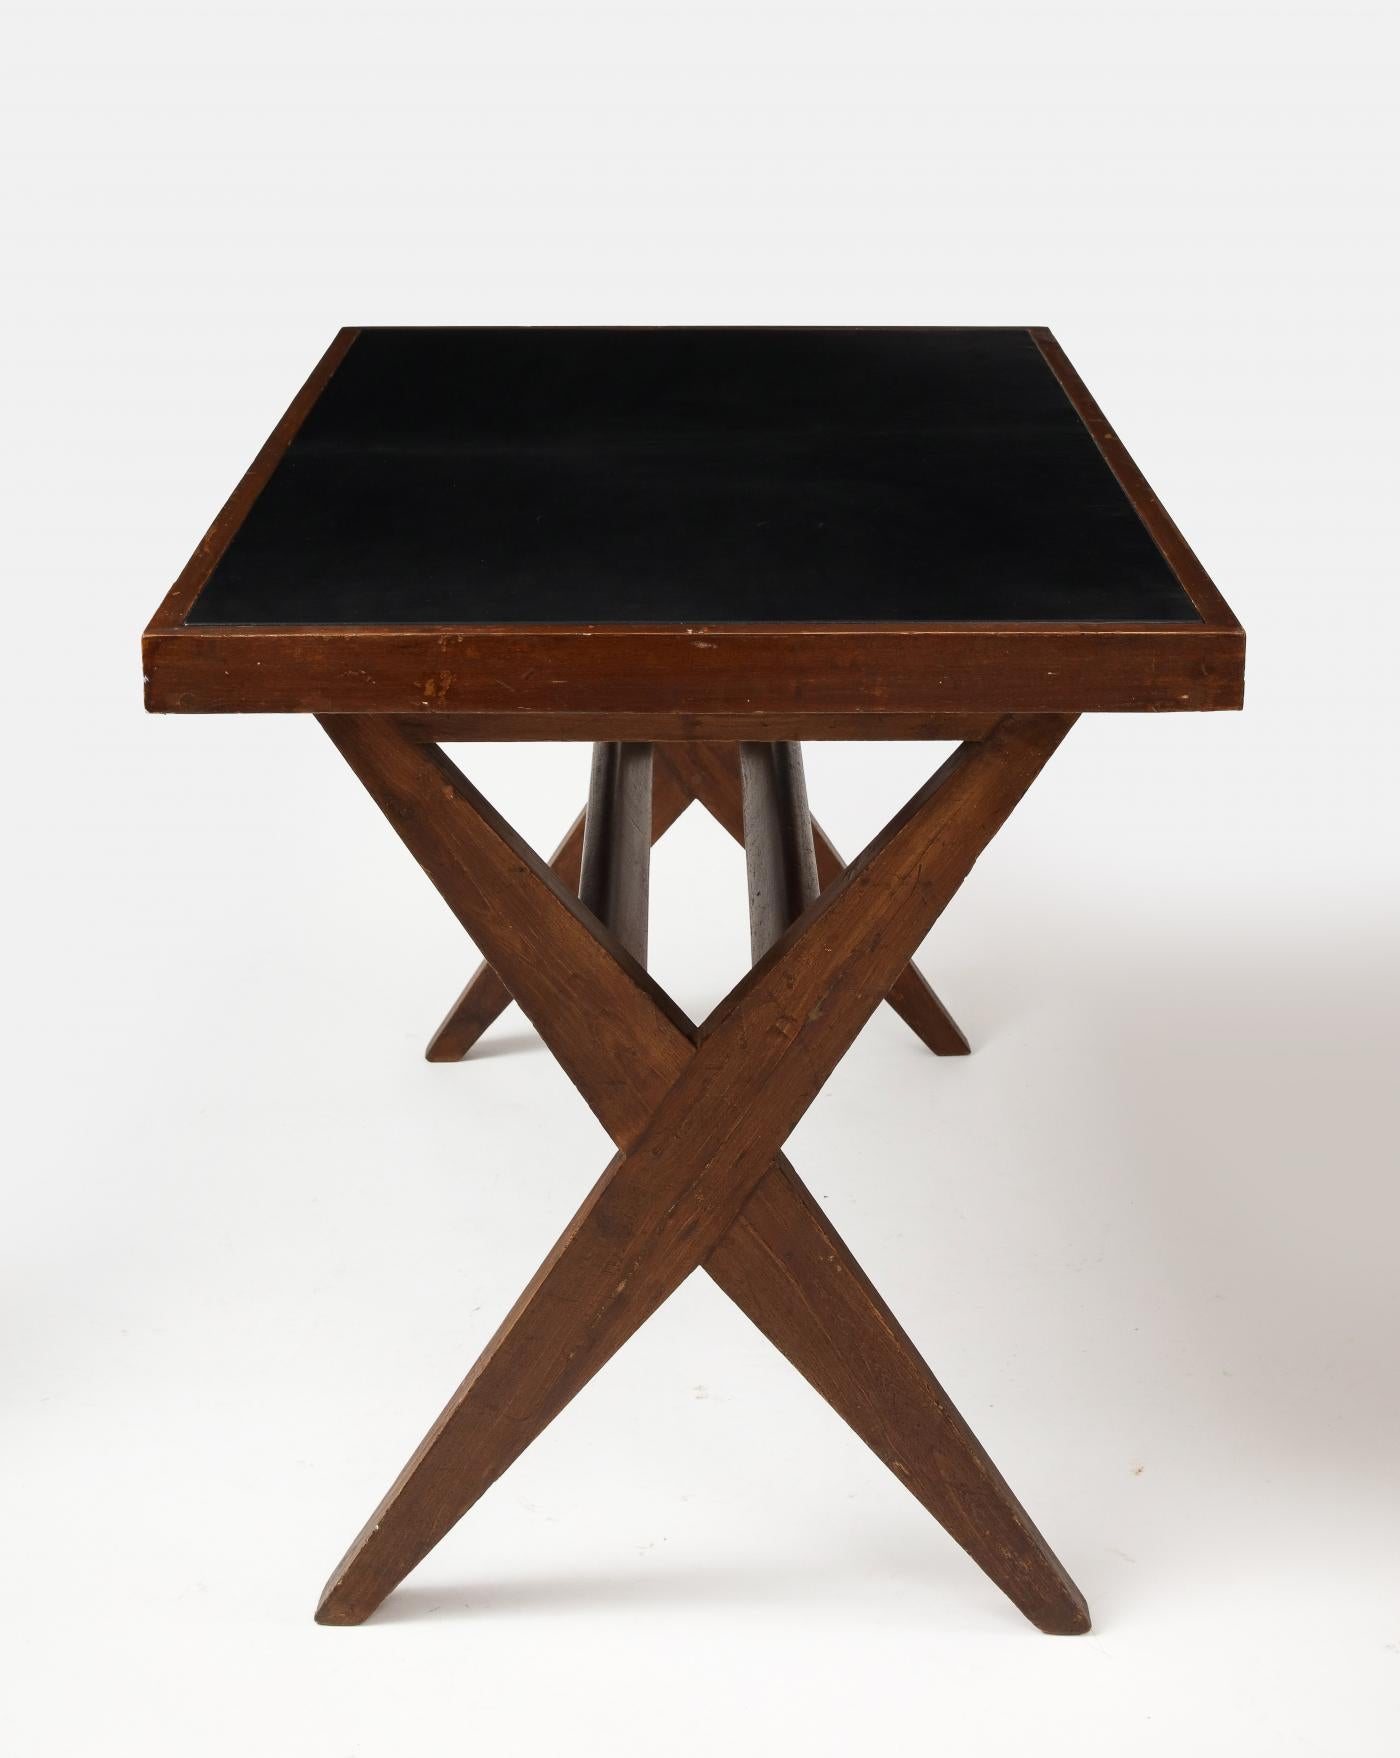 20th Century Leather and Teak Desk by Pierre Jeanneret, 1959 For Sale